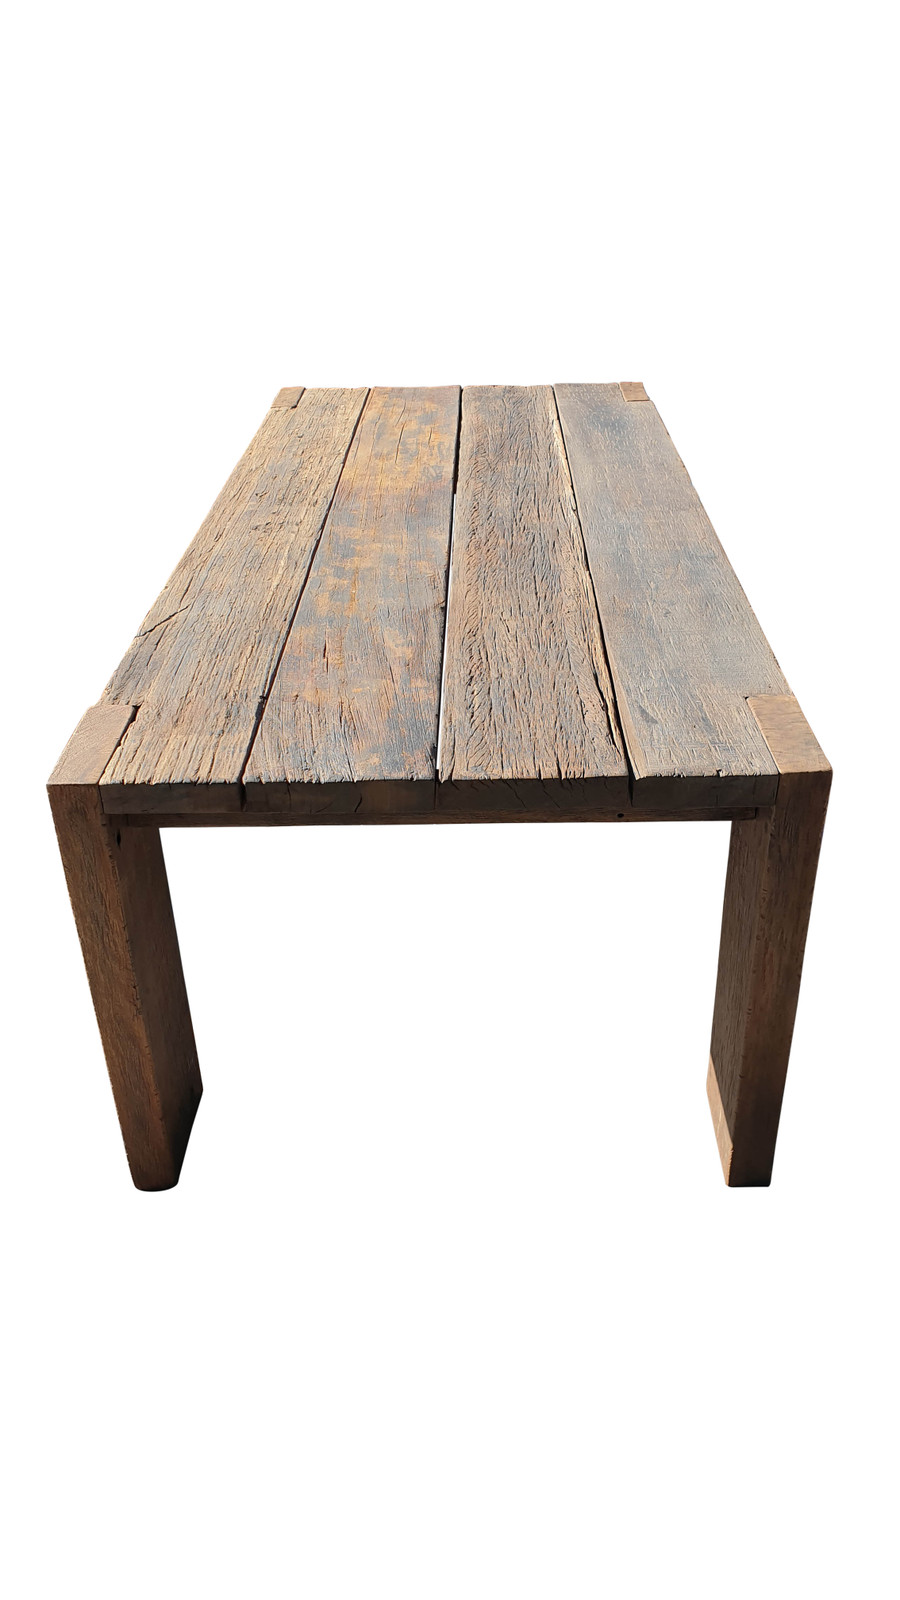 Another end view. Exclusive reclaimed Railwood outdoor table - please read characteristics. Very heavy !
2.2m table shown